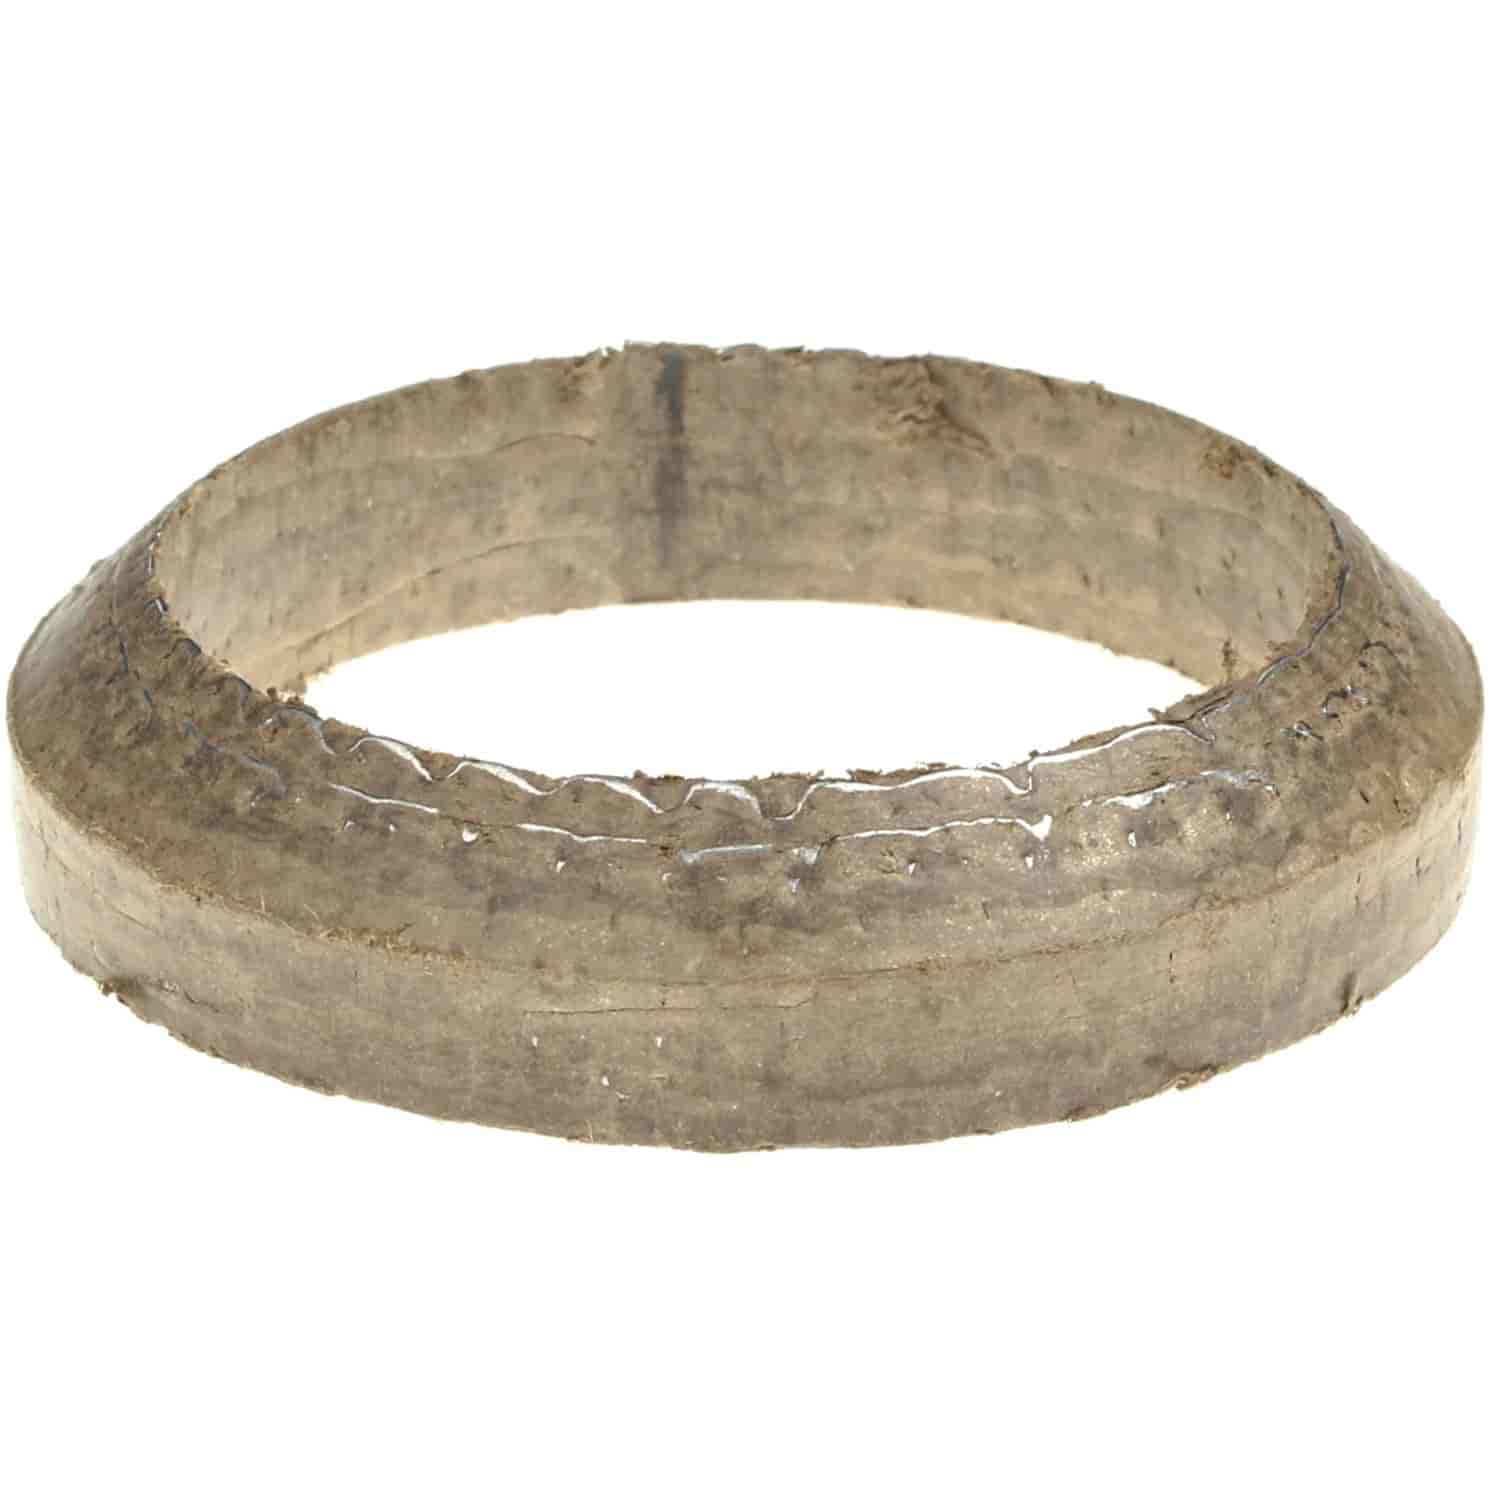 Exhaust Pipe Packing Ring 1968-1980 Various International Applications